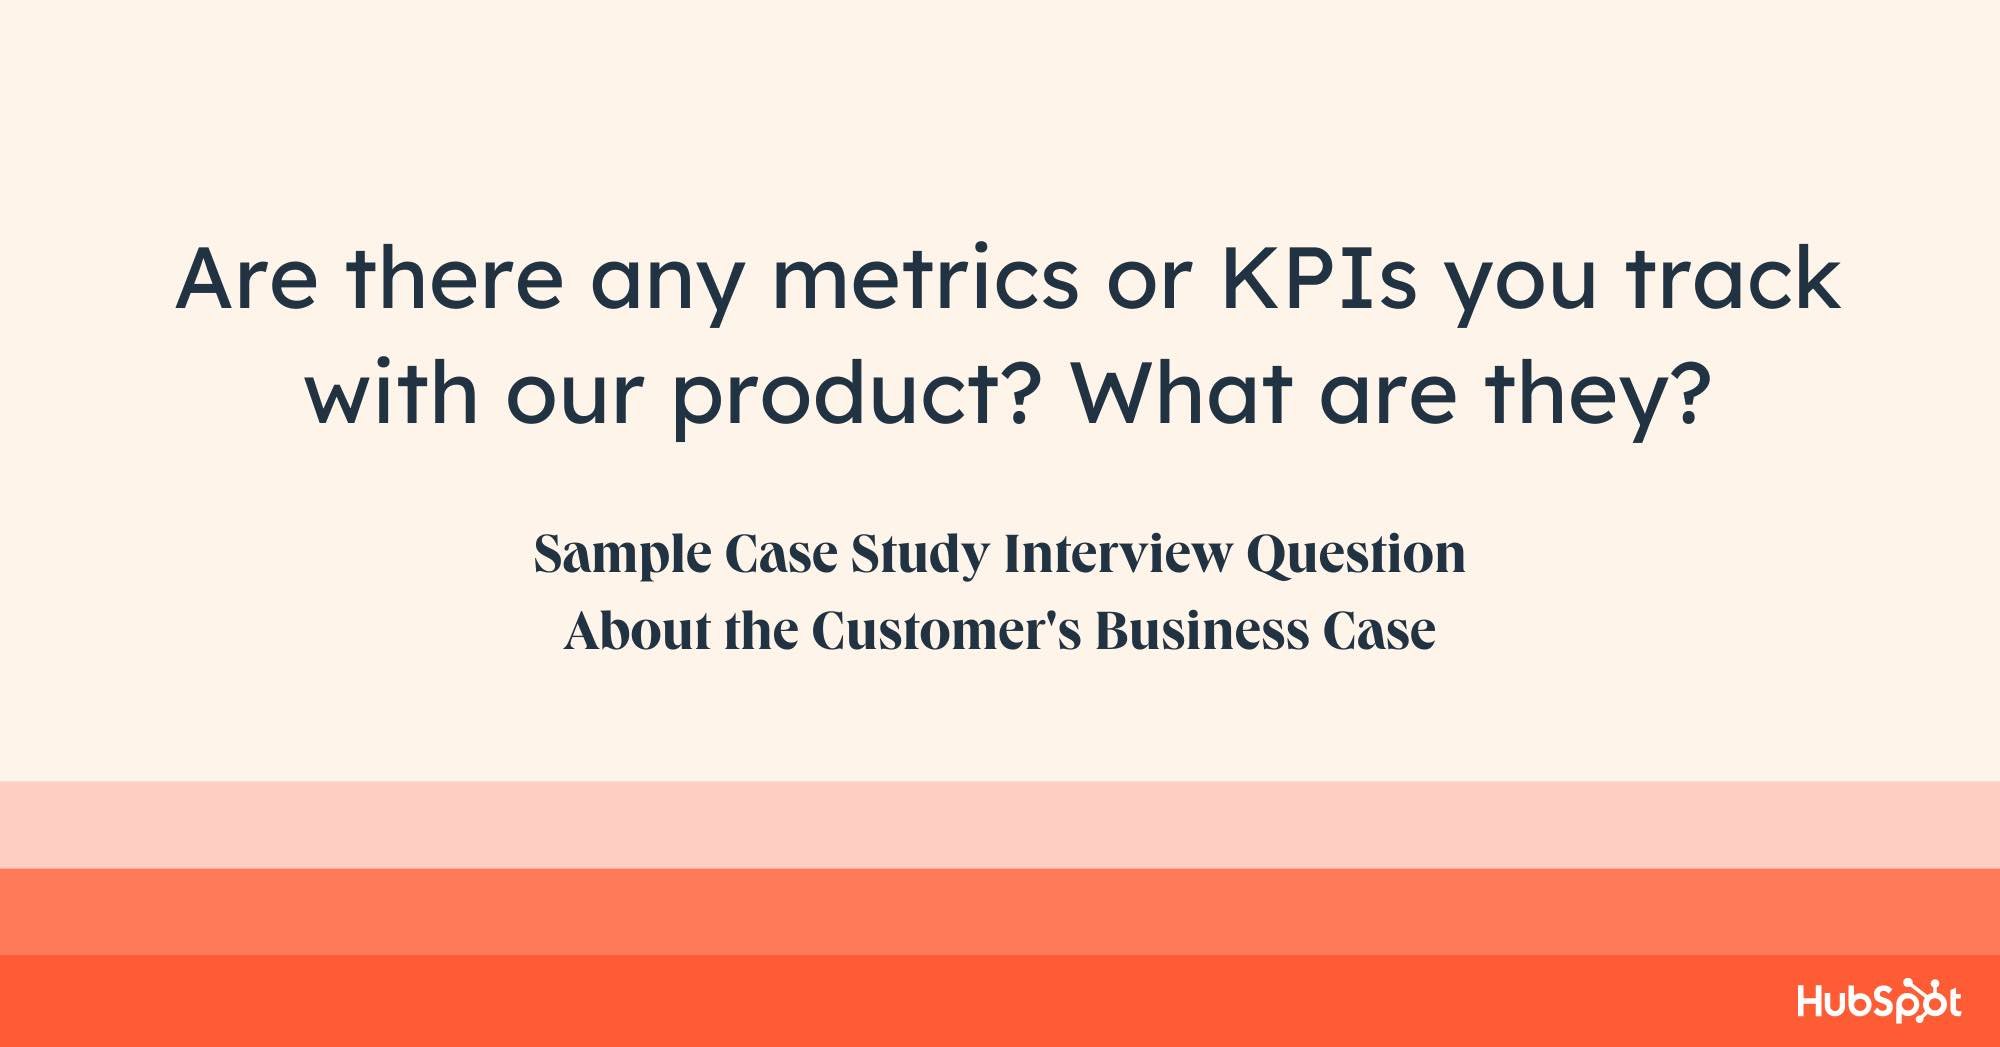 case study questions to ask, are there any metrics or KPIs you track with our product?